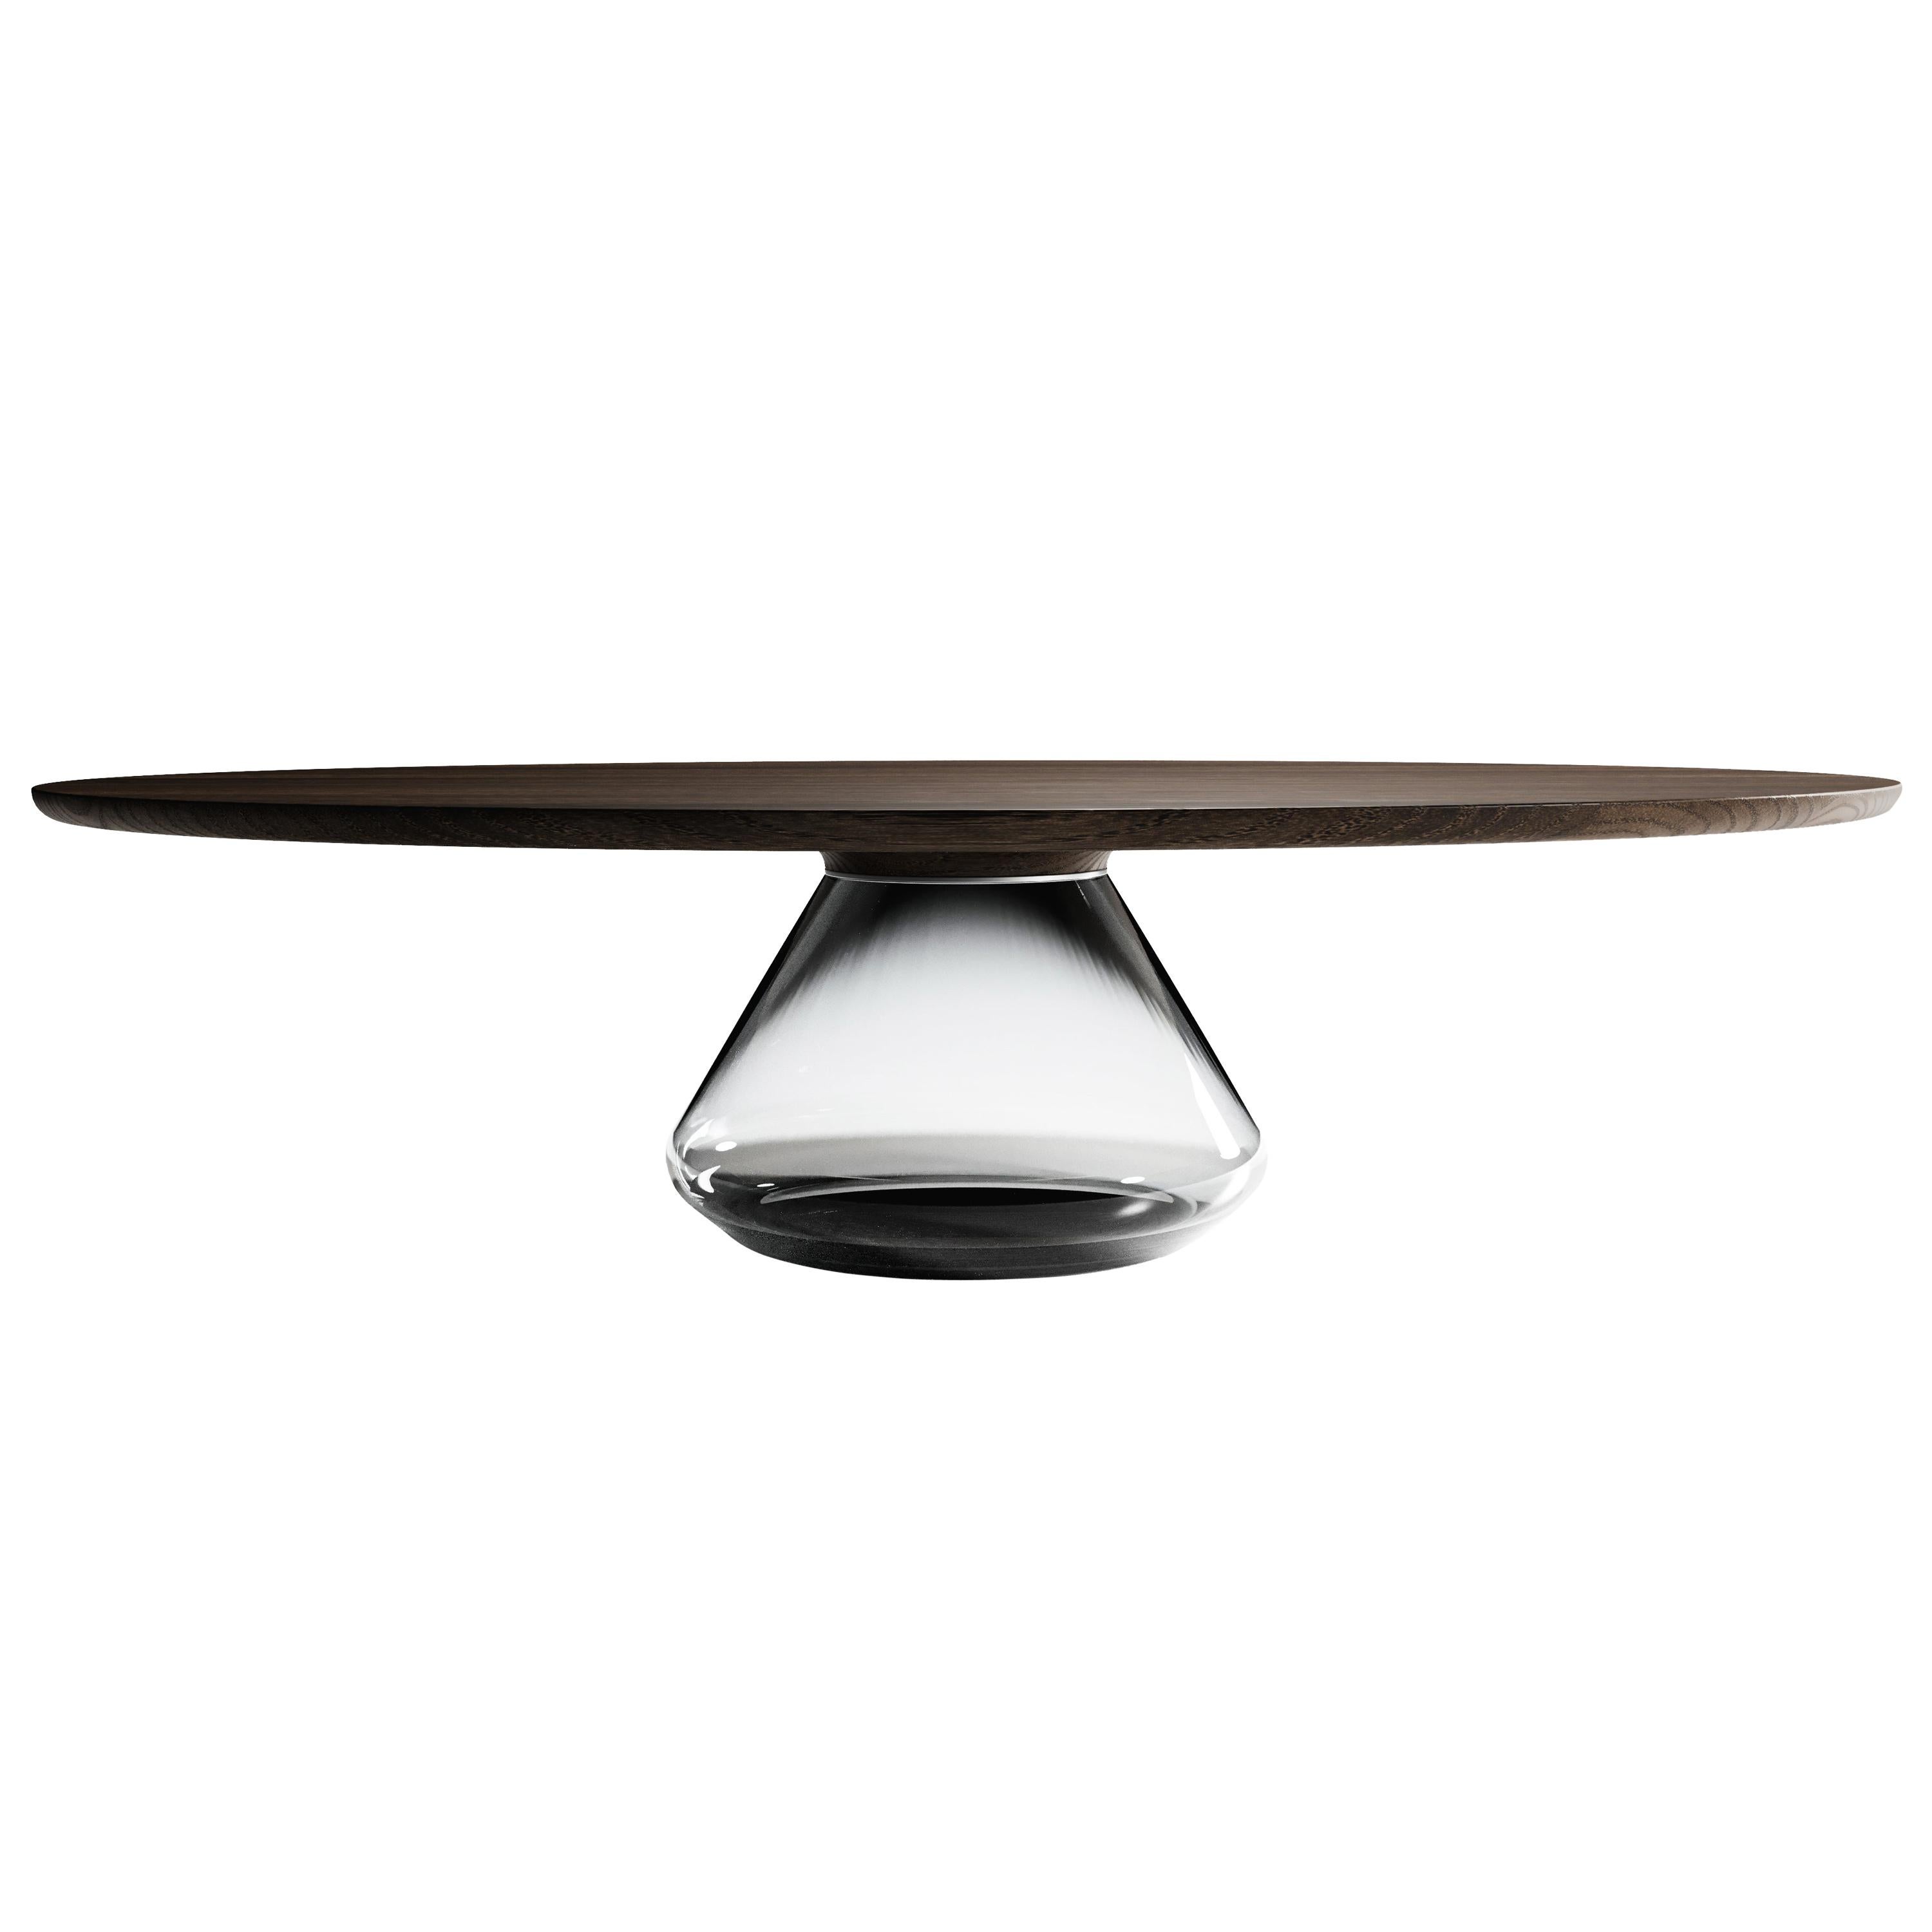 "Smoky Eclipse" Contemporary Coffee Table Ft. Dark Oak Top and Smoky Glass base For Sale